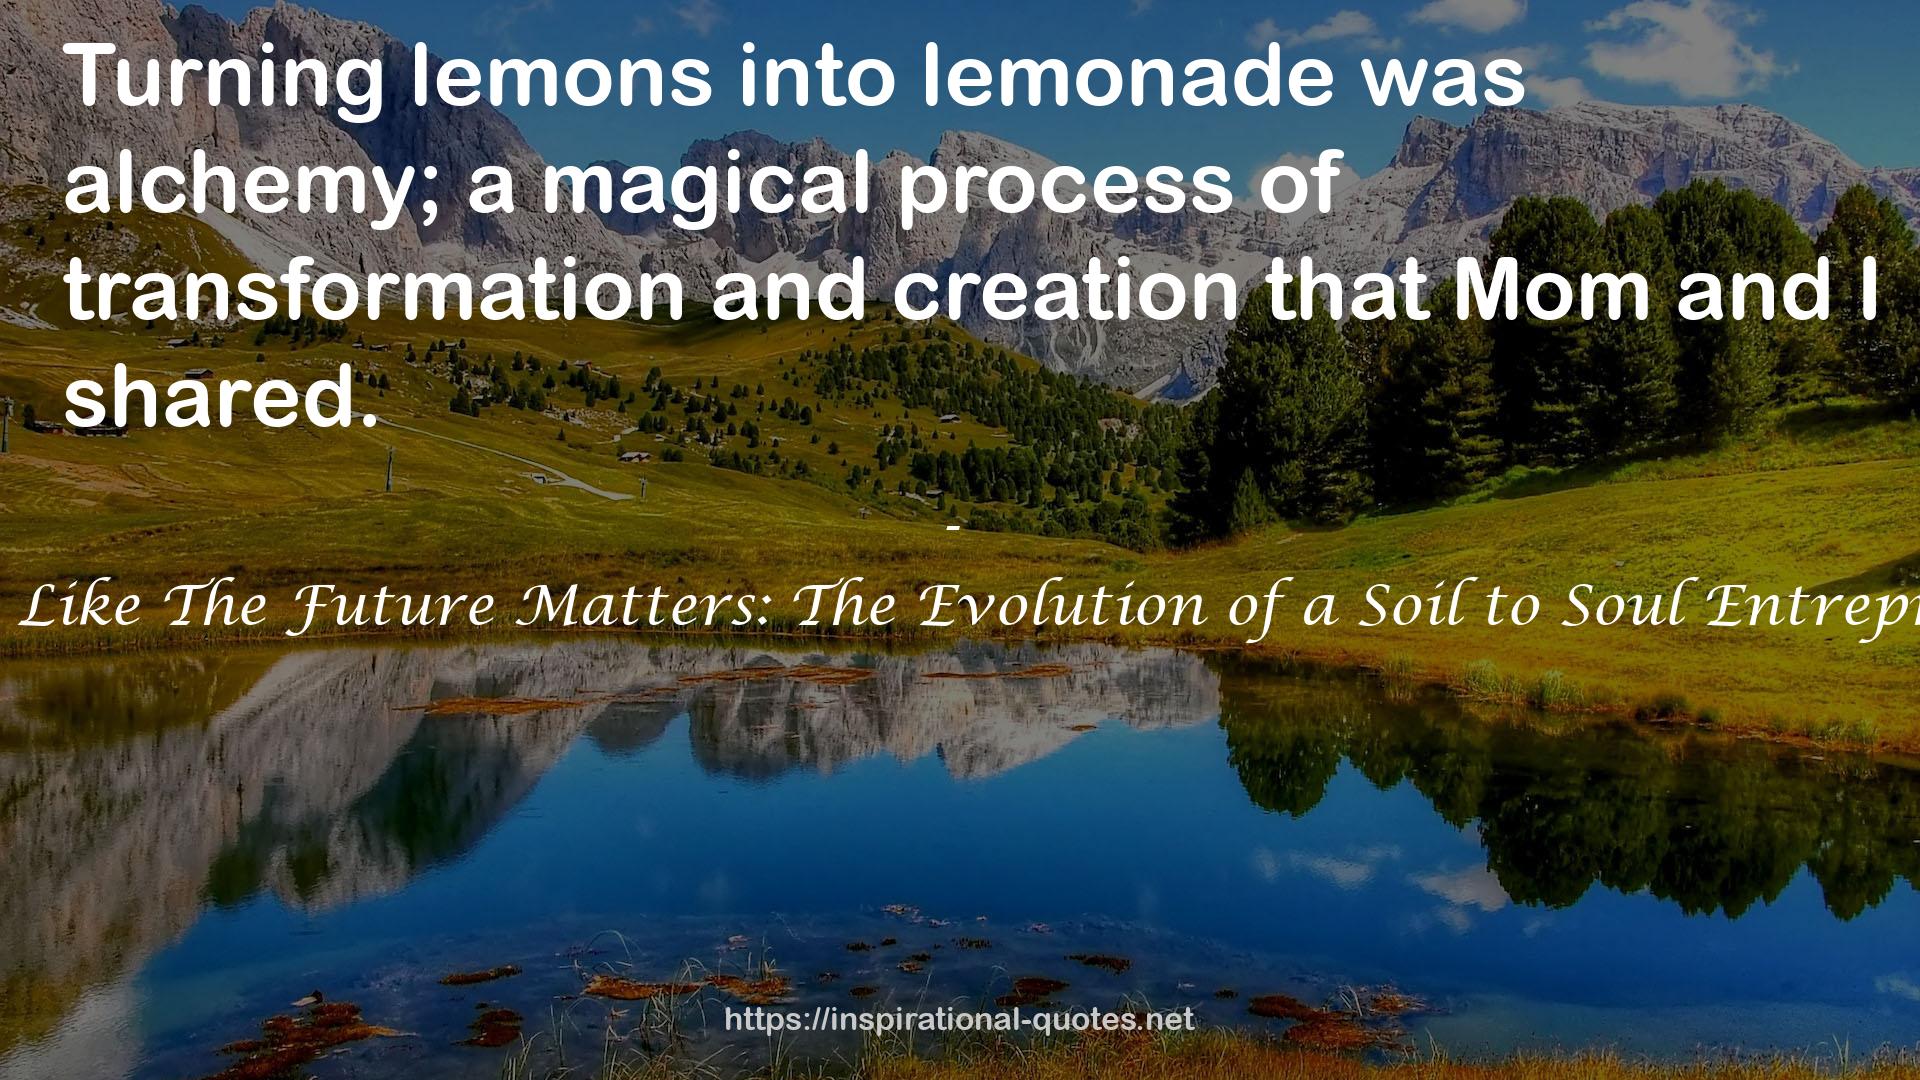 Living Like The Future Matters: The Evolution of a Soil to Soul Entrepreneur QUOTES